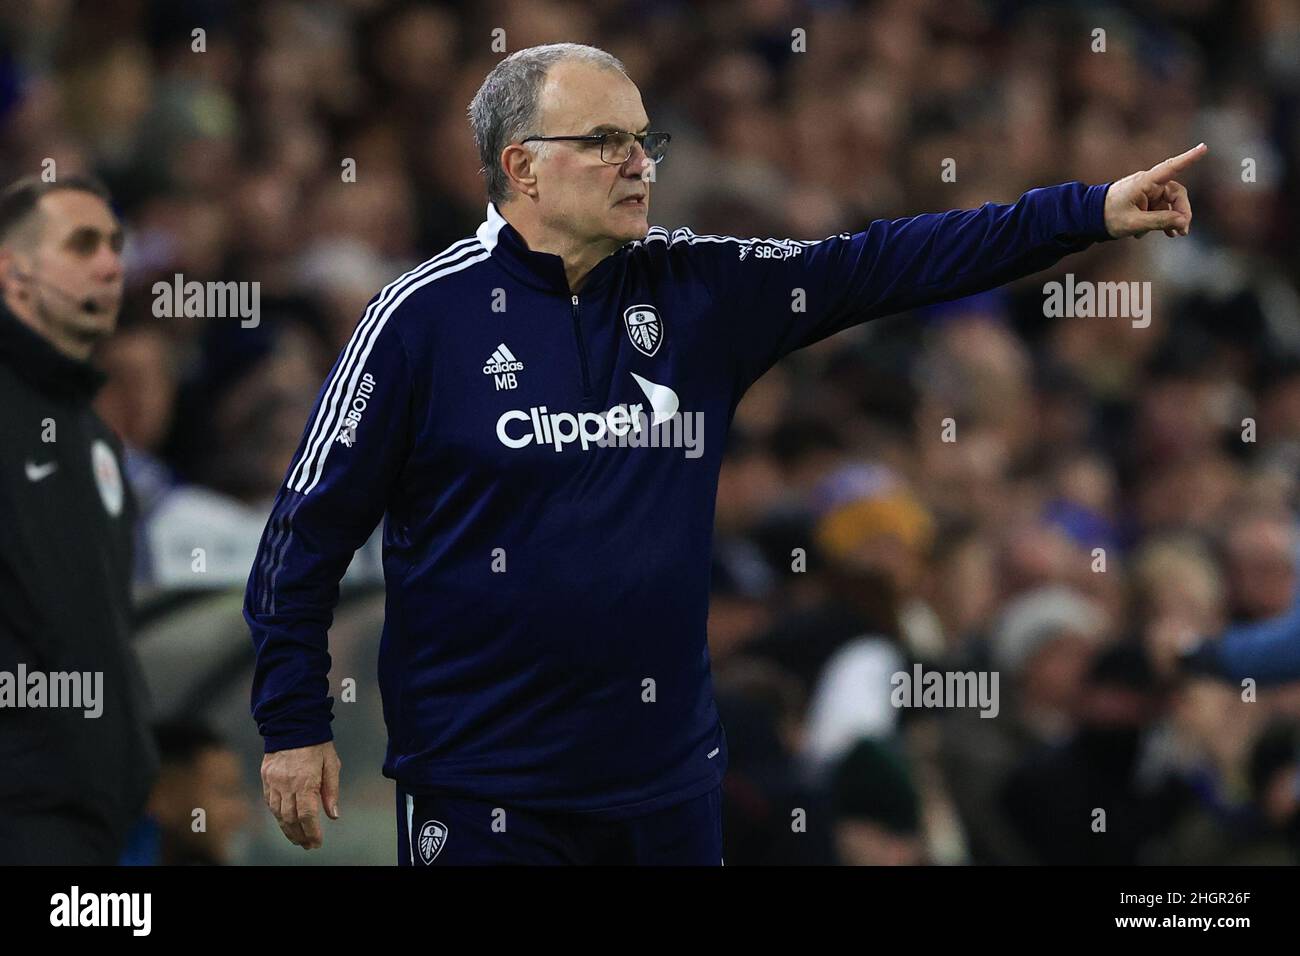 Leeds, UK. 22nd Jan, 2022. Marcelo Bielsa manager of Leeds United reacts to being 0-1 down during the Premier League fixture Leeds United vs Newcastle United at Elland Road, Leeds, UK, 22nd January 2022 Credit: News Images /Alamy Live News Stock Photo